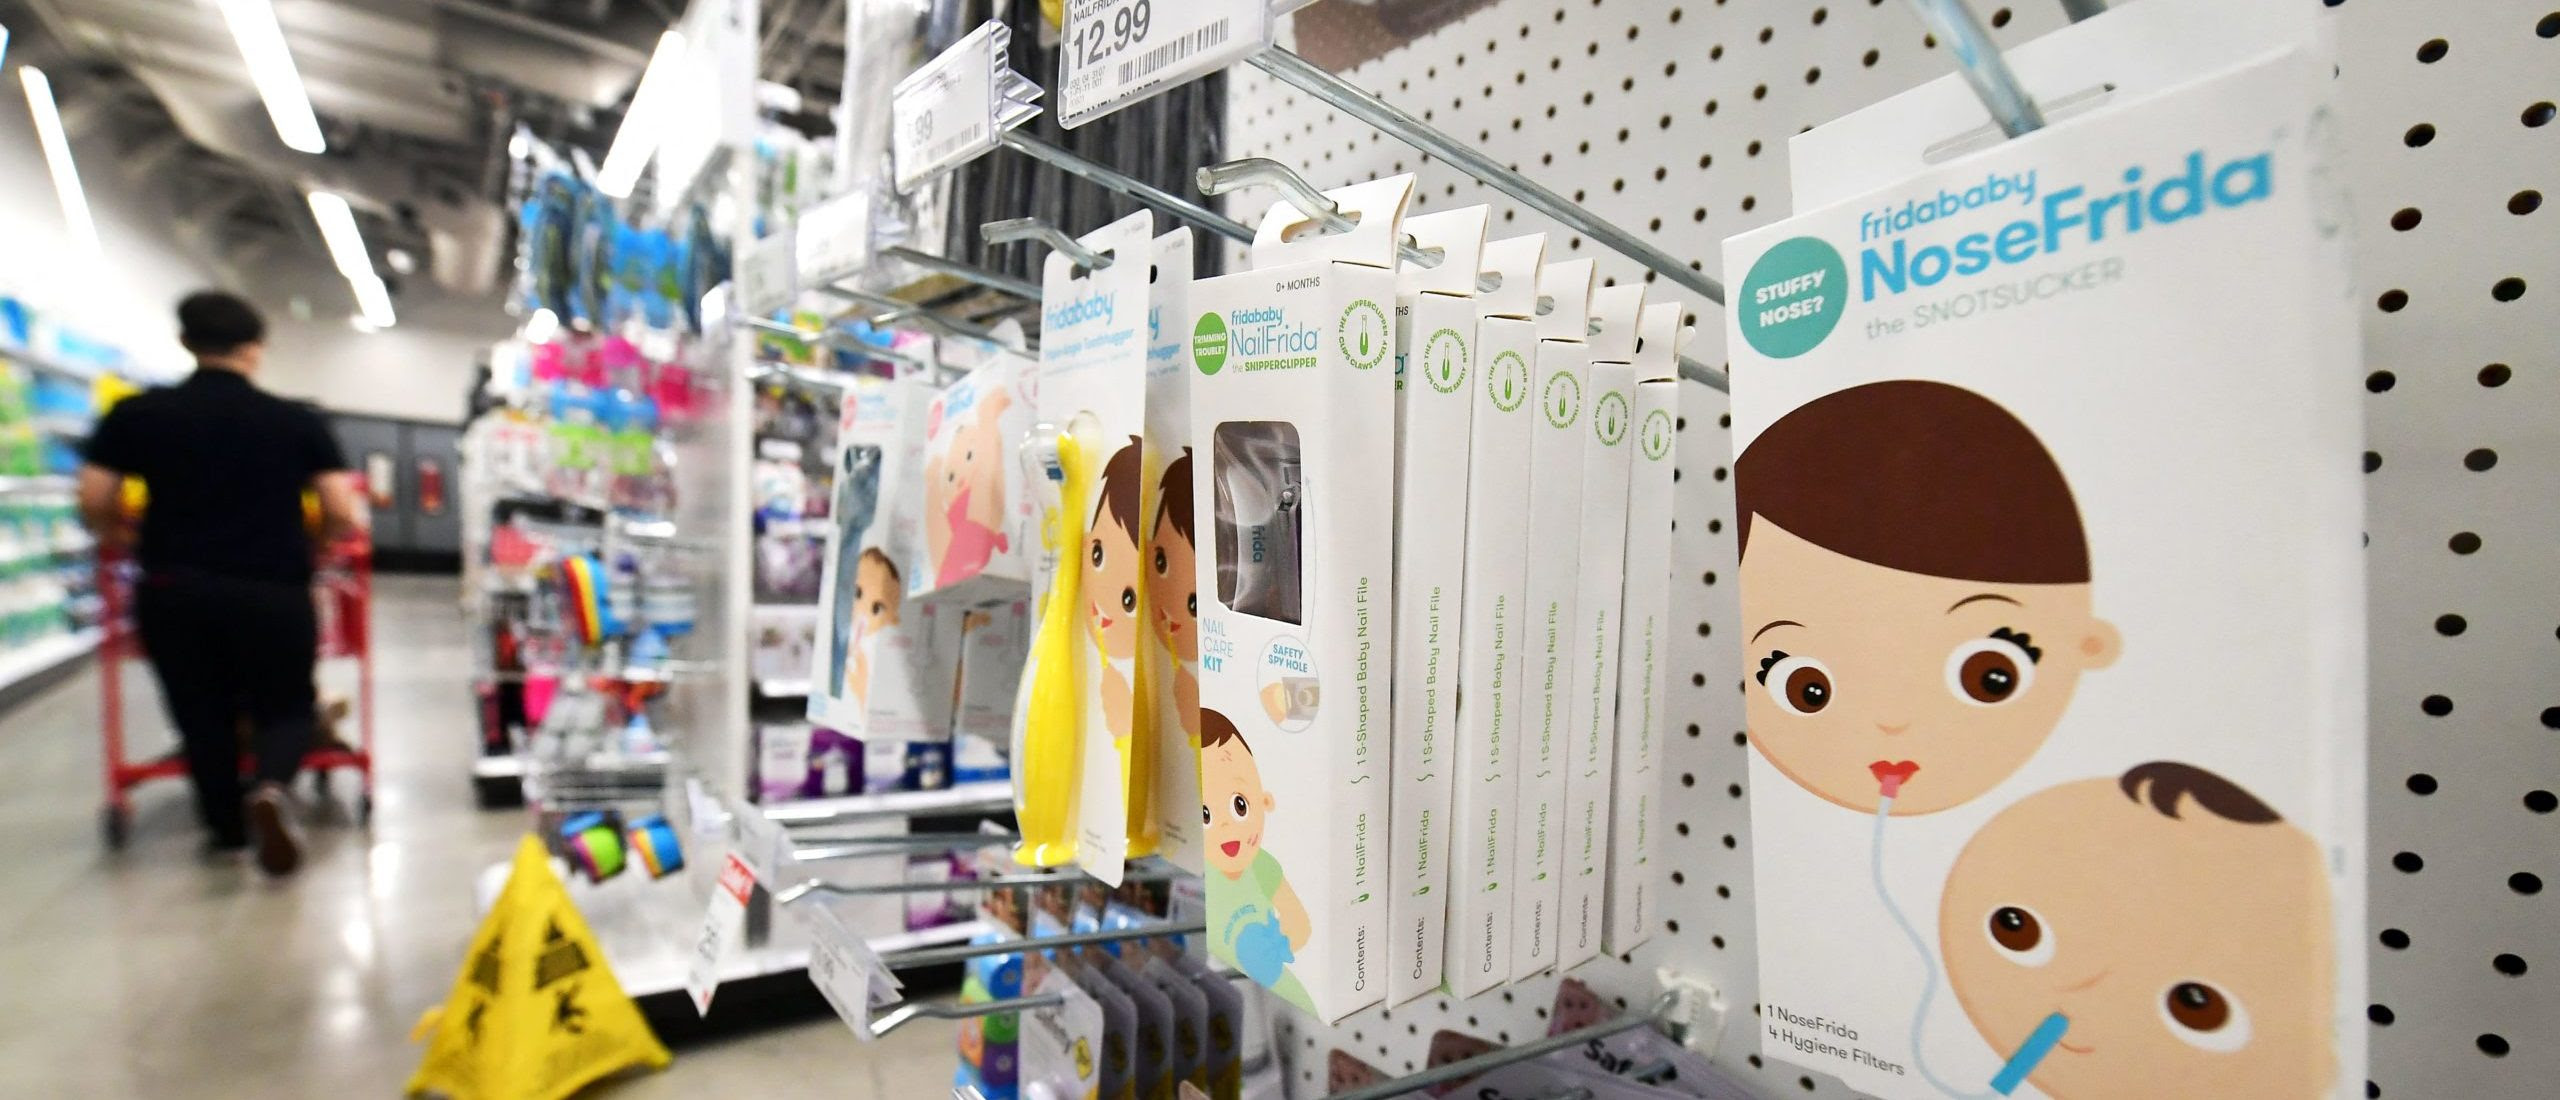 Law Mandates Large Department Stores In California Include A Gender-Neutral Section For Toys, ‘Childcare Items’